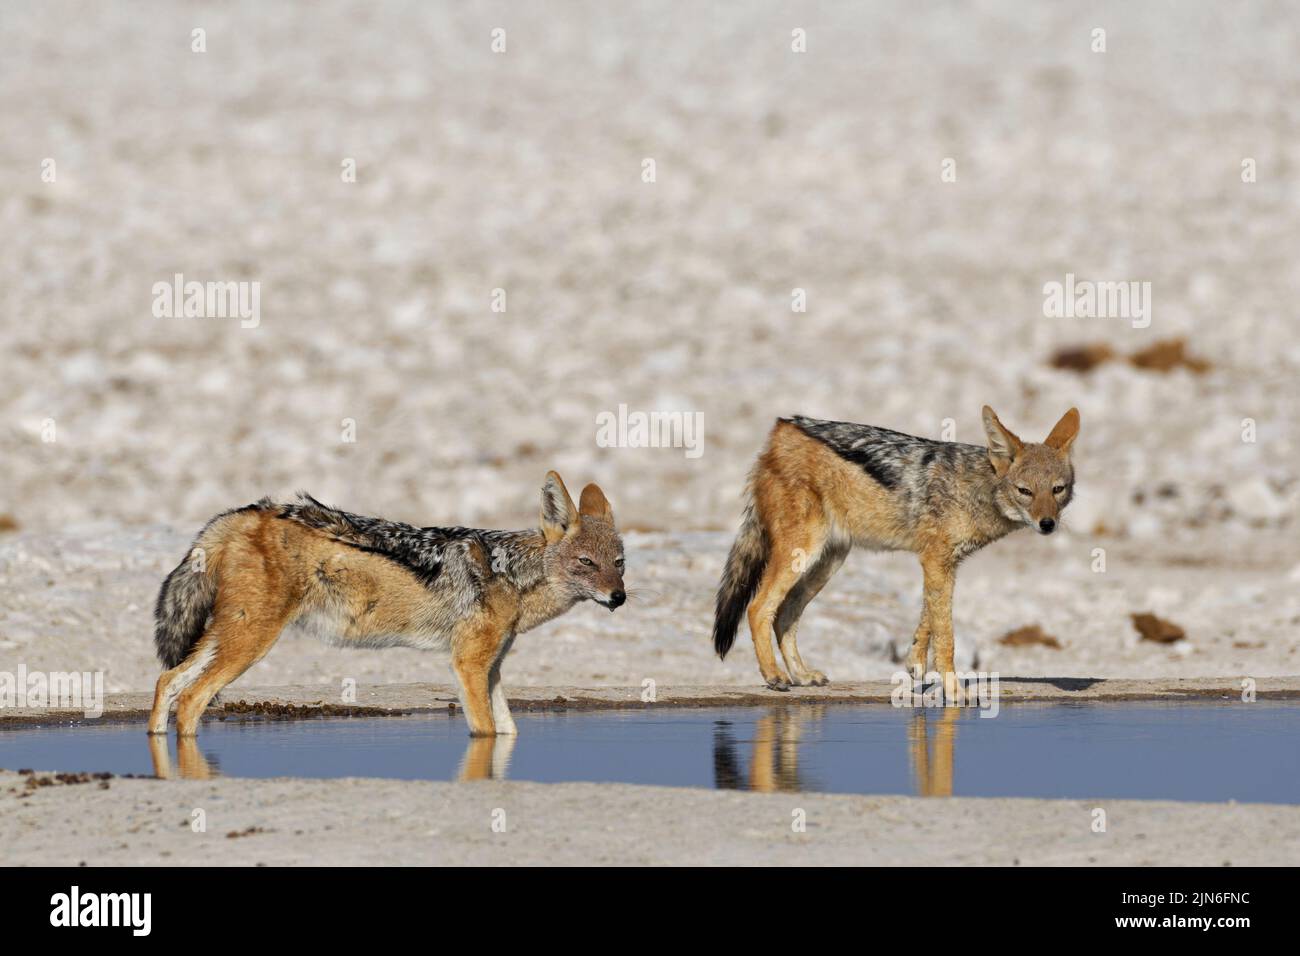 Black-backed jackals (Canis mesomelas), two adults at waterhole, alert, one in water, Etosha National Park, Namibia, Africa Stock Photo